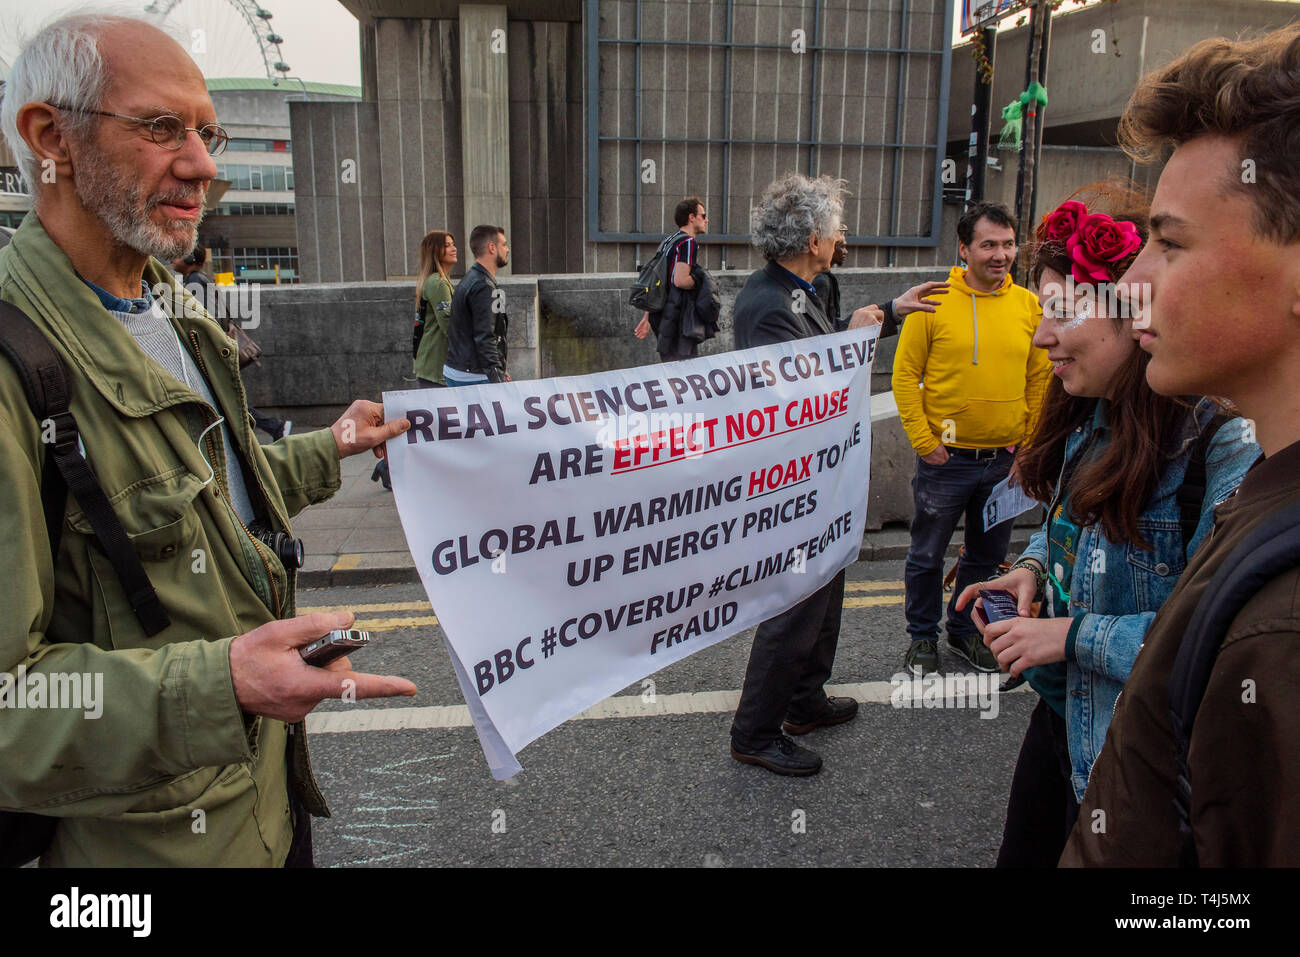 London, UK. 17th Apr, 2019. Climate change skeptics come to confront the rebellion -  The evening generally has a festival atmosphere - Day 3 - Protestors from Extinction Rebellion block several junctions in London as part of their ongoing protest to demand action by the UK Government on the 'climate chrisis'. The action is part of an international co-ordinated protest. Credit: Guy Bell/Alamy Live News Stock Photo